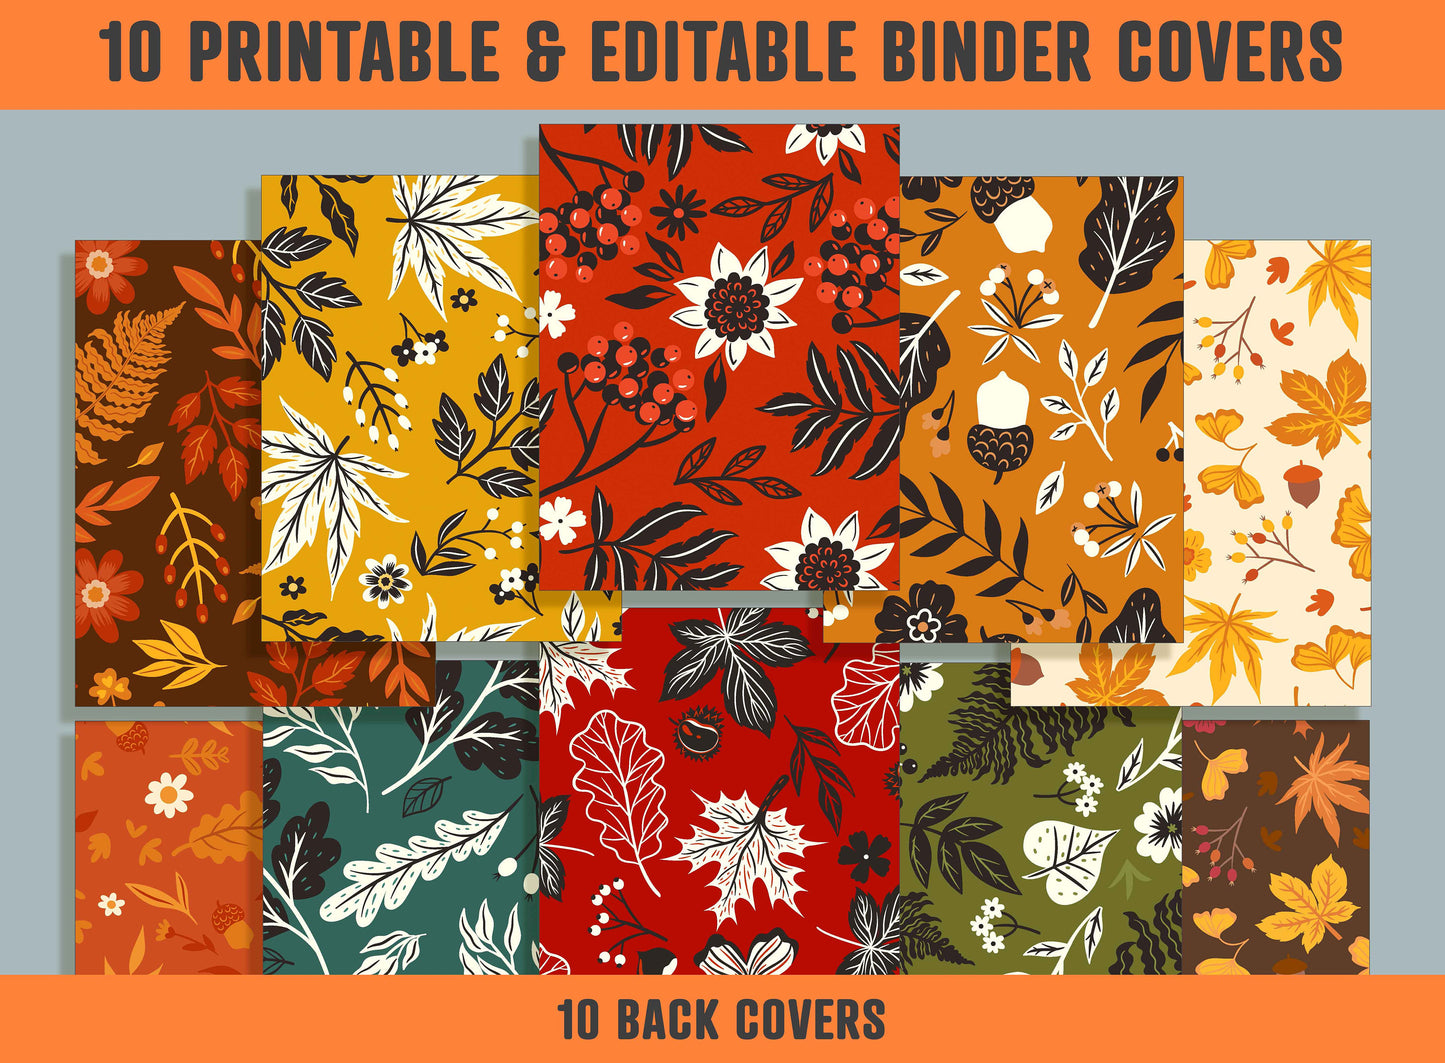 Autumn Leaves and Berries Binder Cover, 10 Printable/Editable Binder Covers + Spines, Planner Template, Teacher/School Binder Labels/Inserts